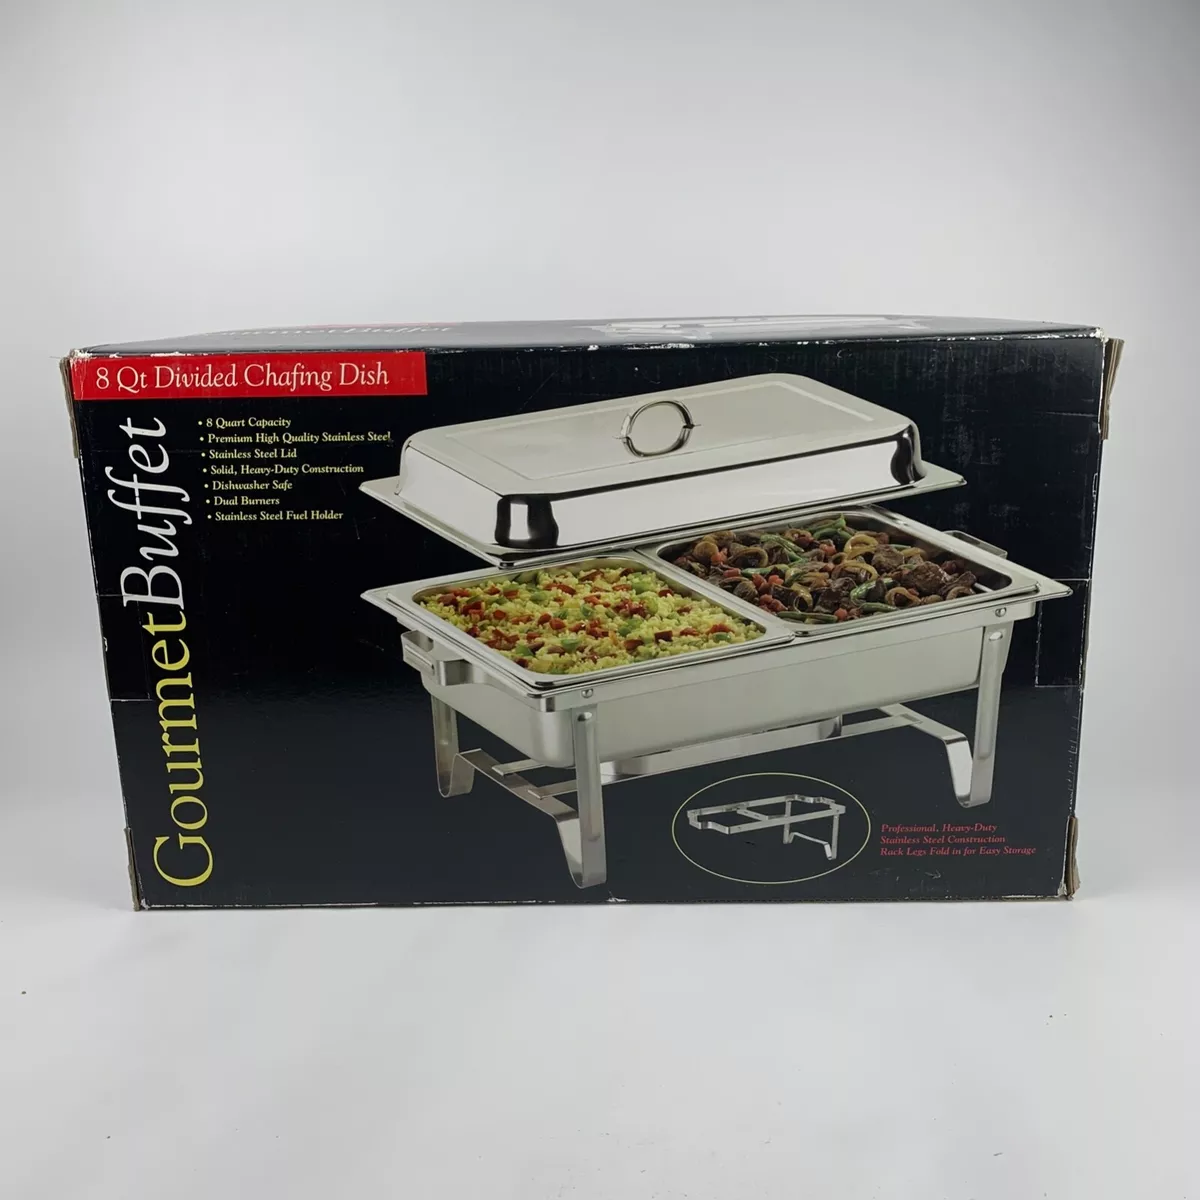 NEW Gourmet Buffet 8 Qt Divided Chafing Dish Stainless Steel New in Box | eBay